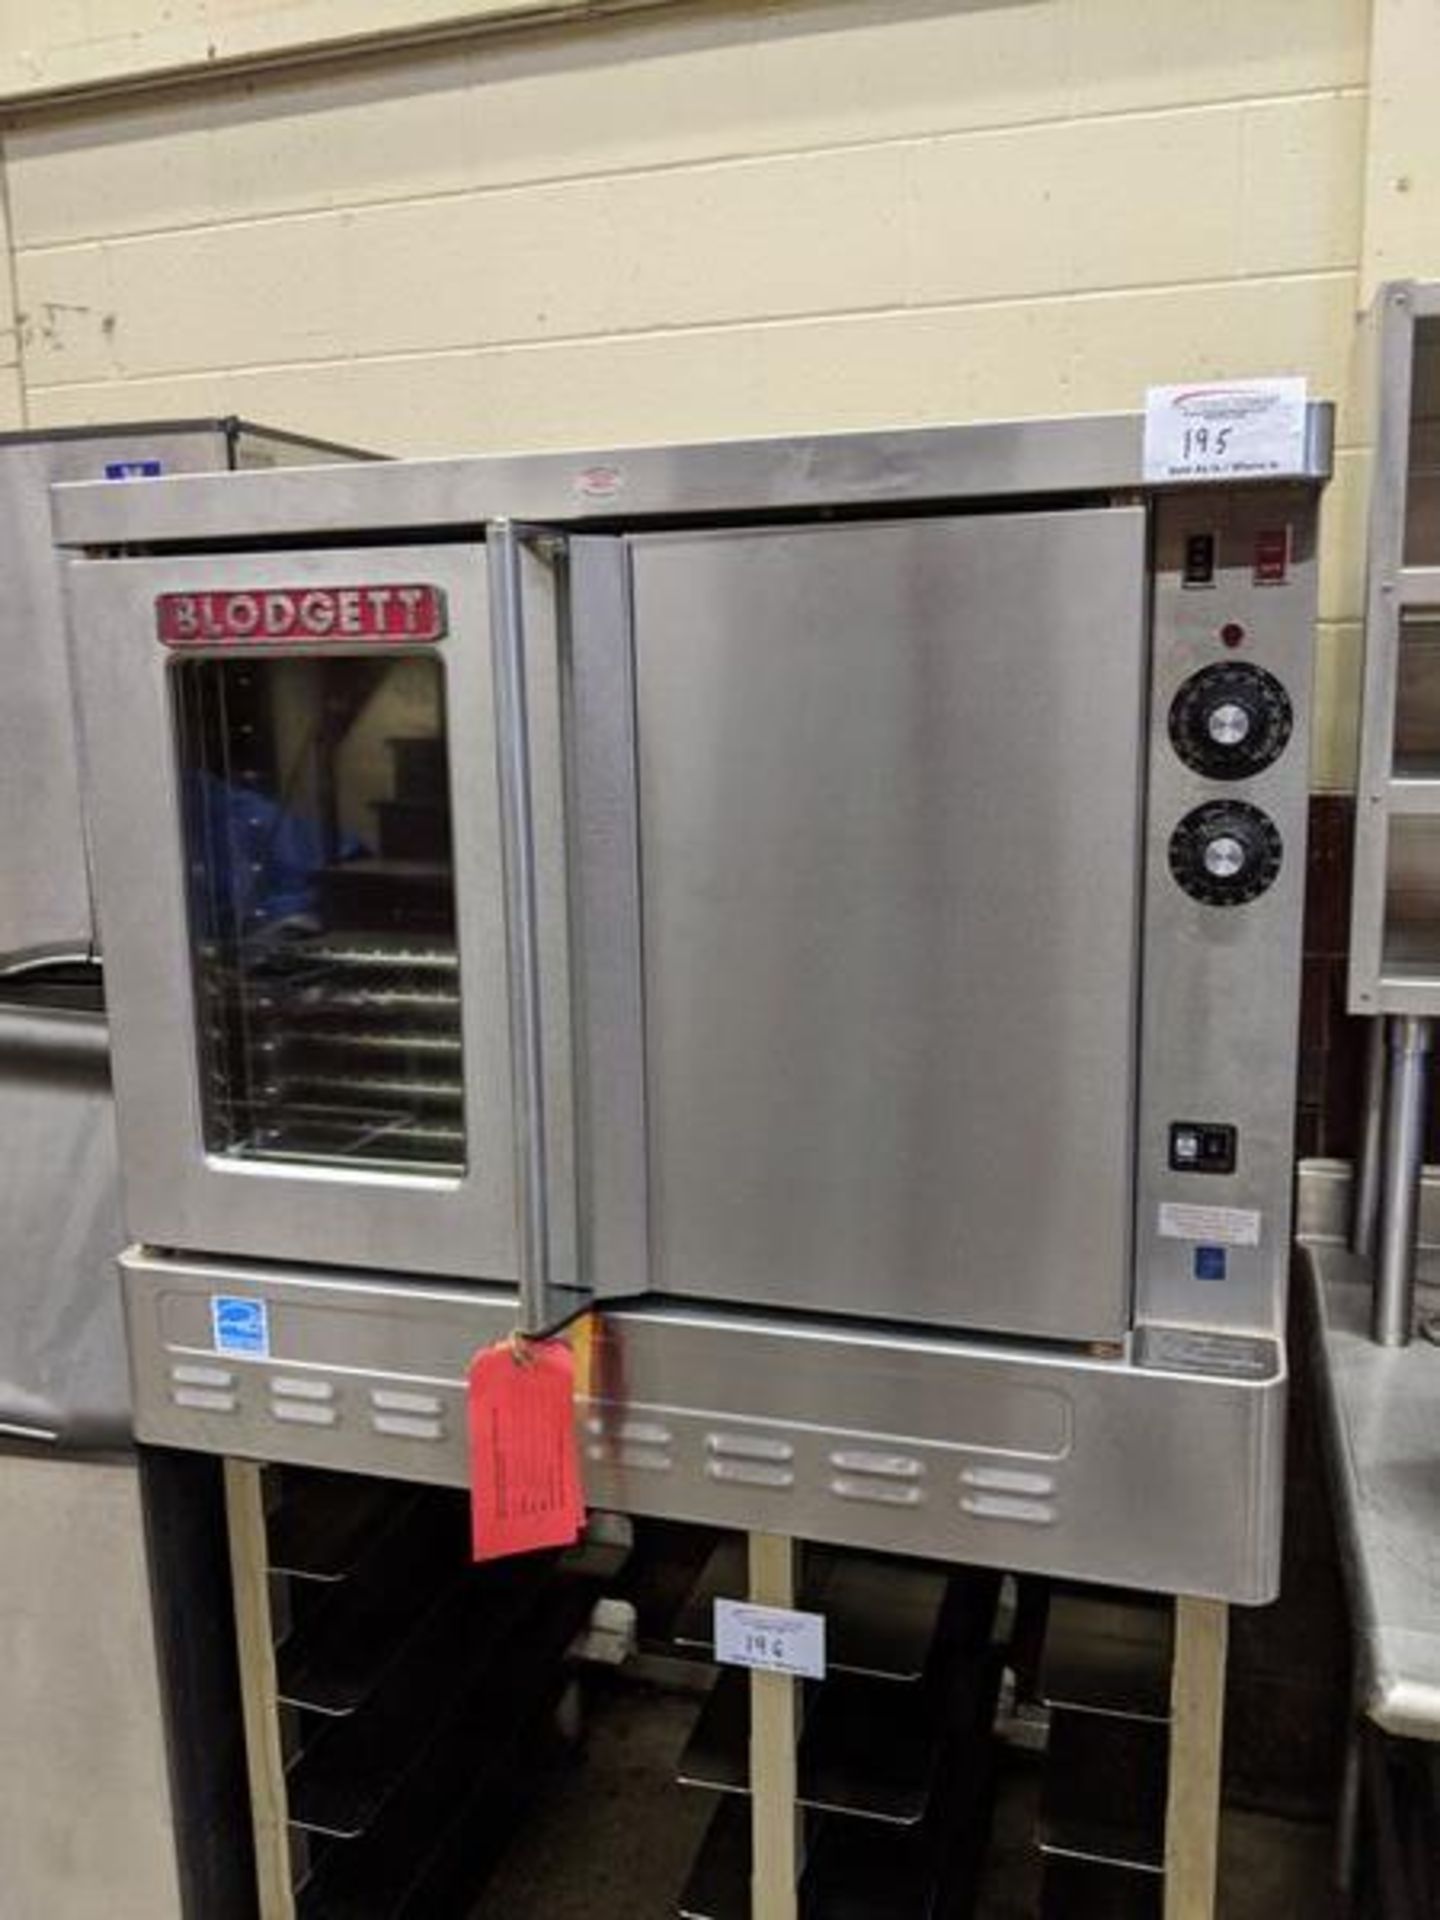 Blodgett Model SHO-100 Gas Convection Oven - Unused